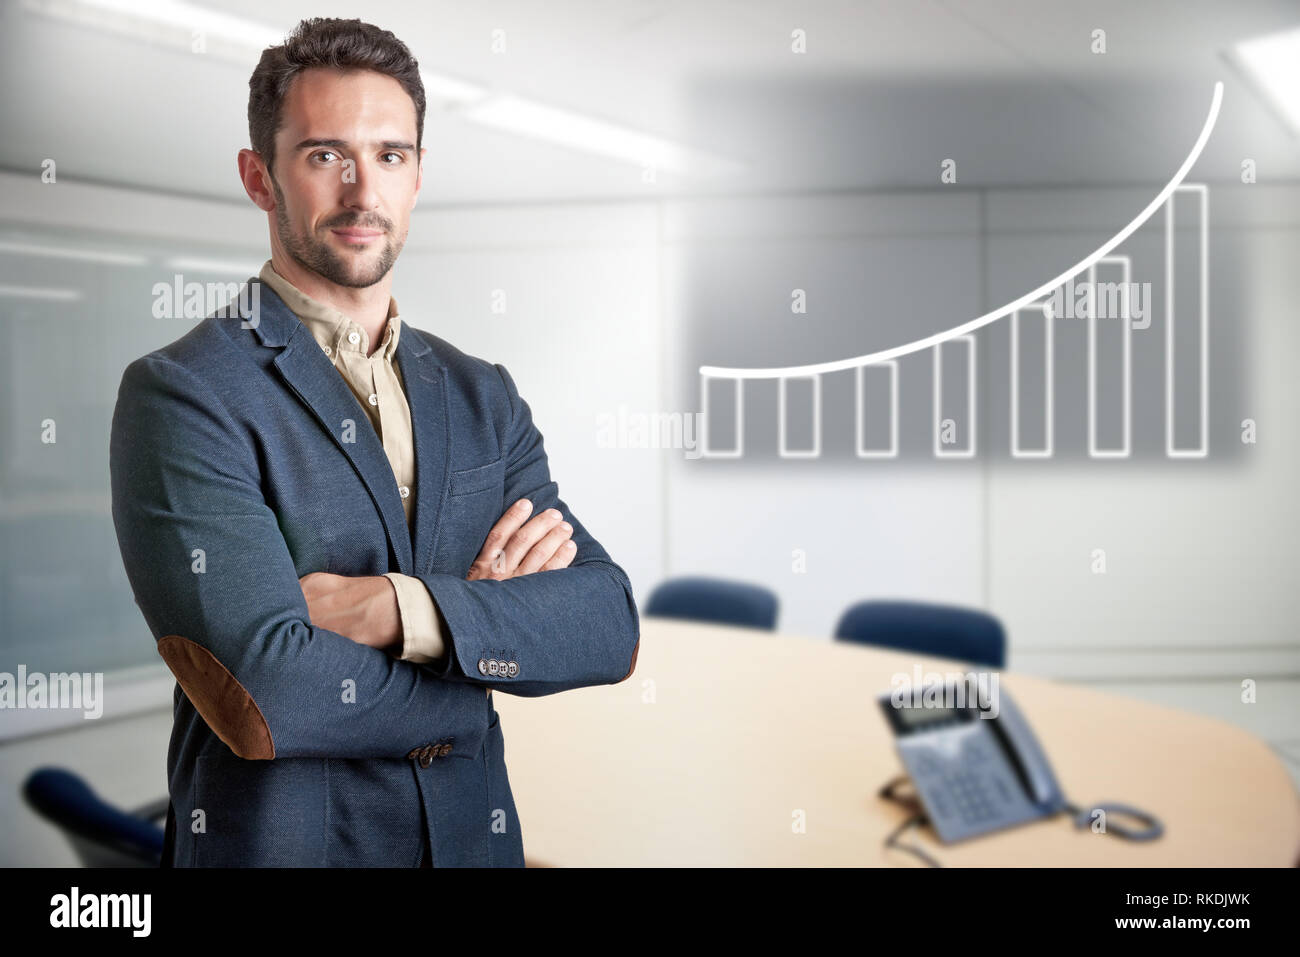 Casual business man with arms crossed in a meeting room Stock Photo